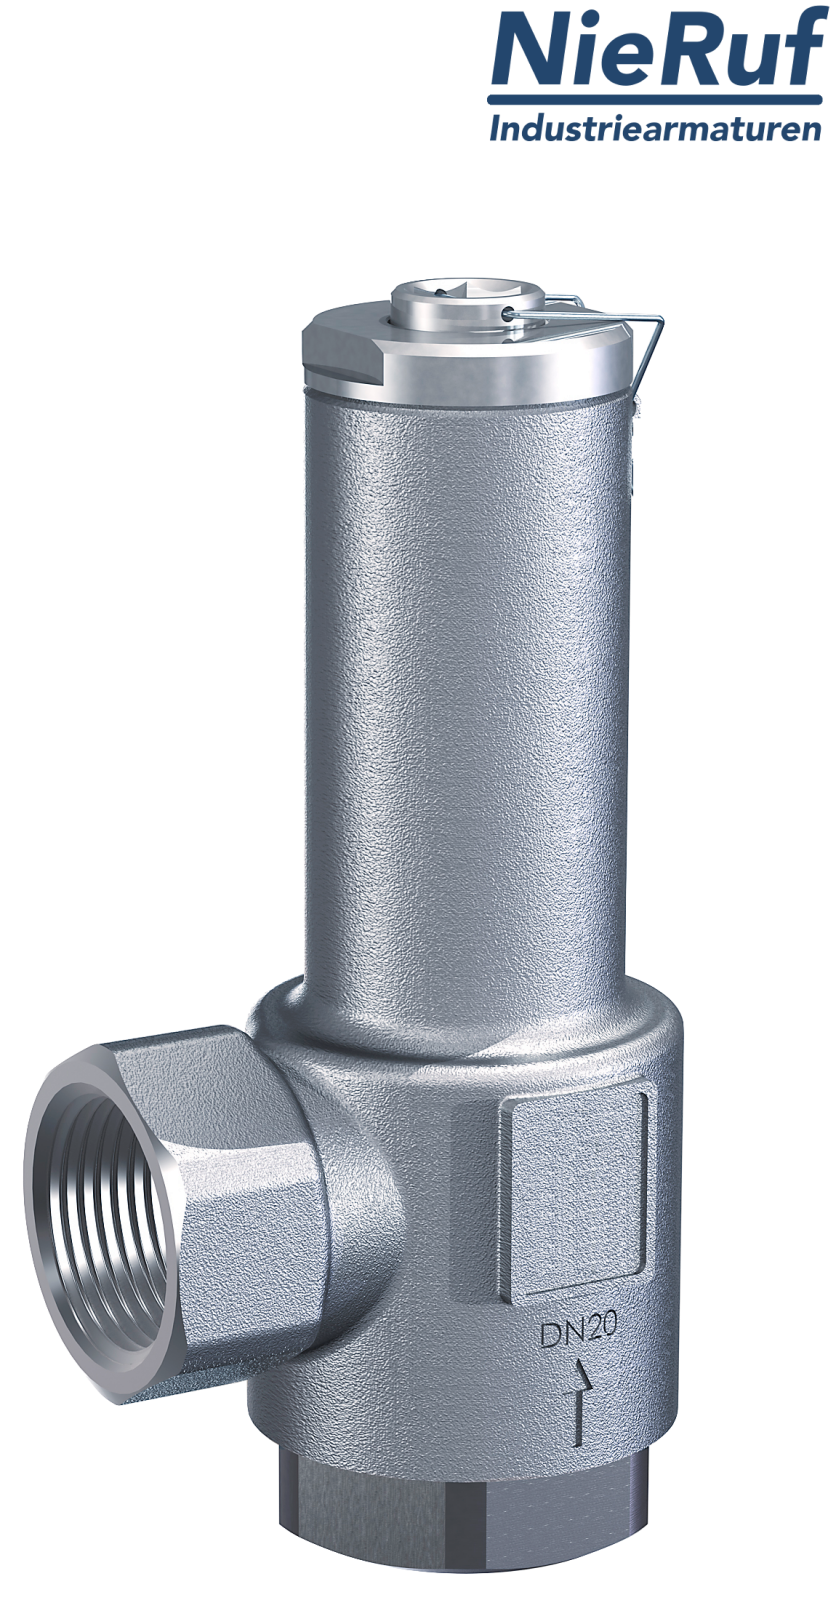 angle-type overflow valve 1/2" inch fm UV04 stainless steel AISI 316L 2 - 12 bar